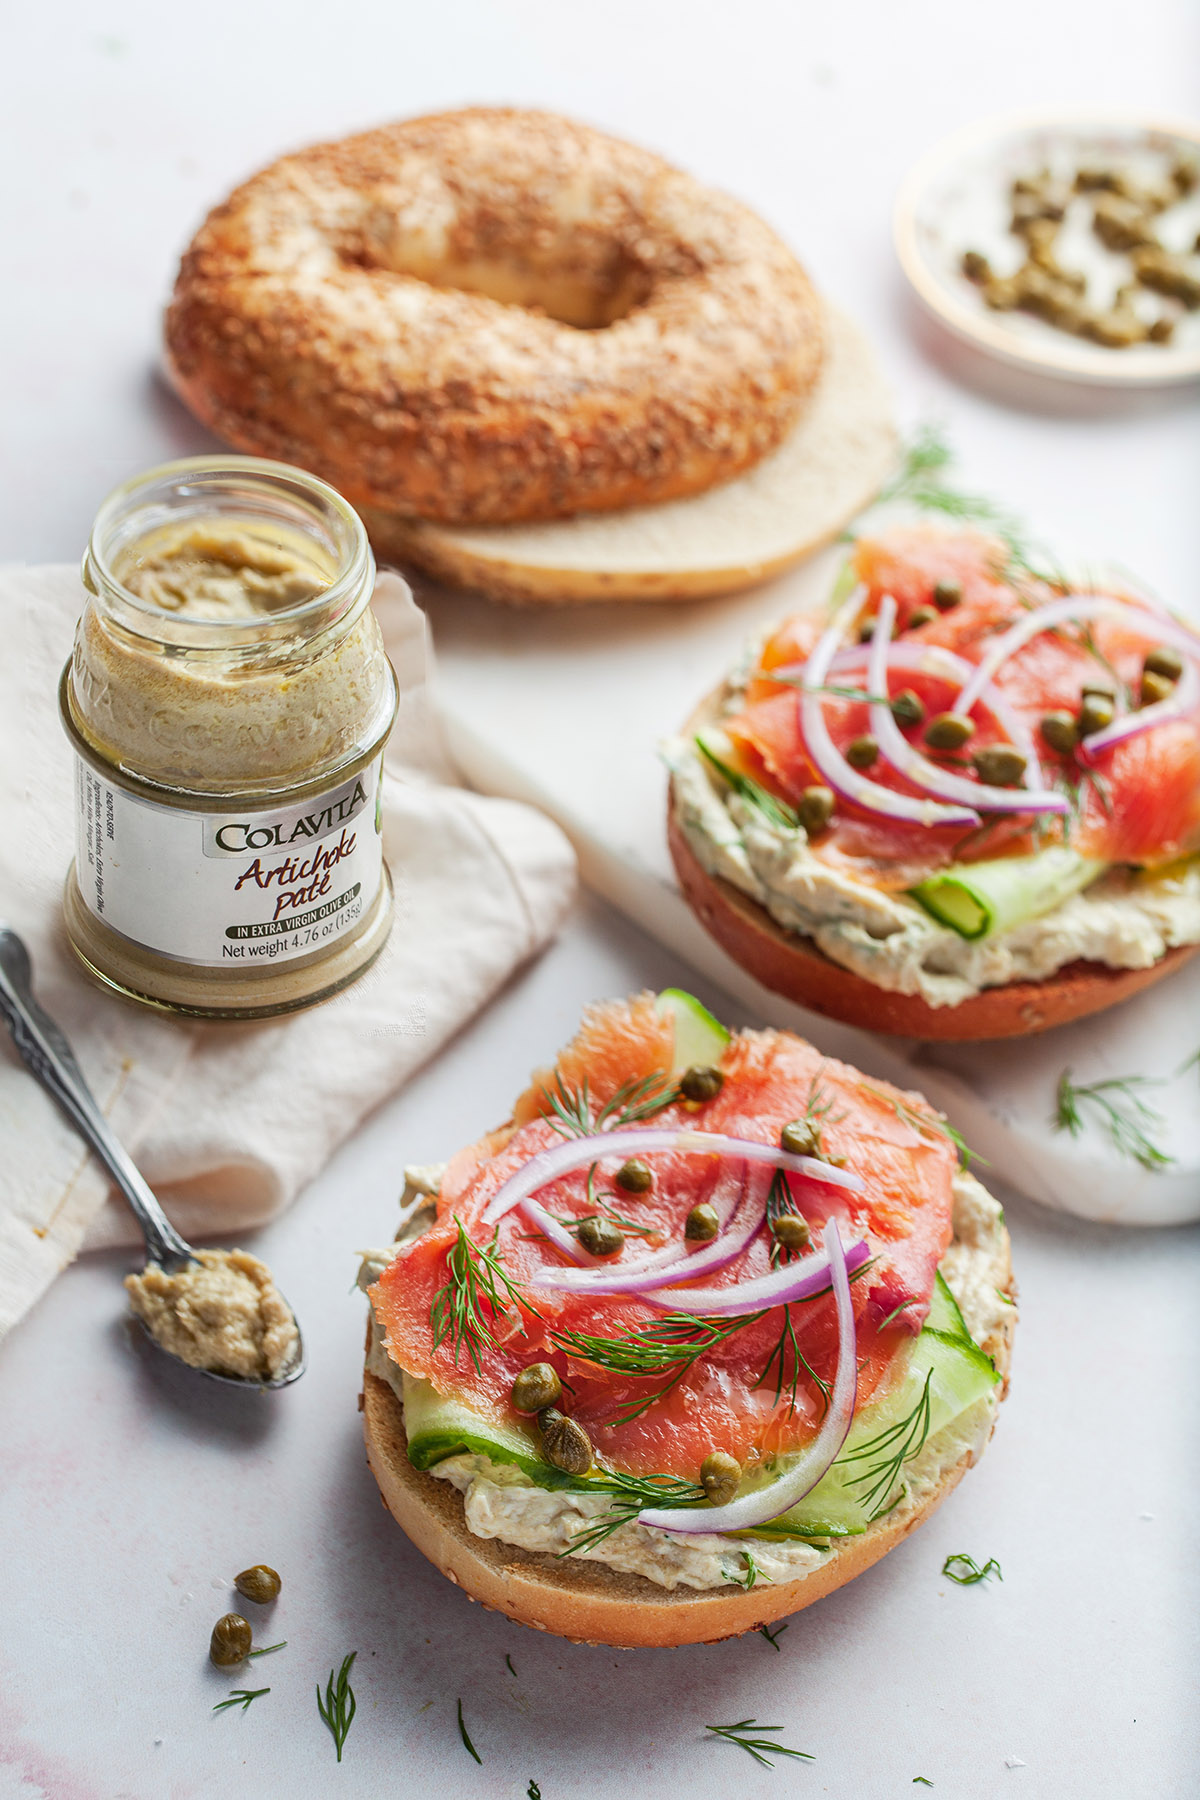 Smoked Salmon Bagel Sandwich With Artichoke Pate Spread Colavita Recipes,Marriage Vows For Him